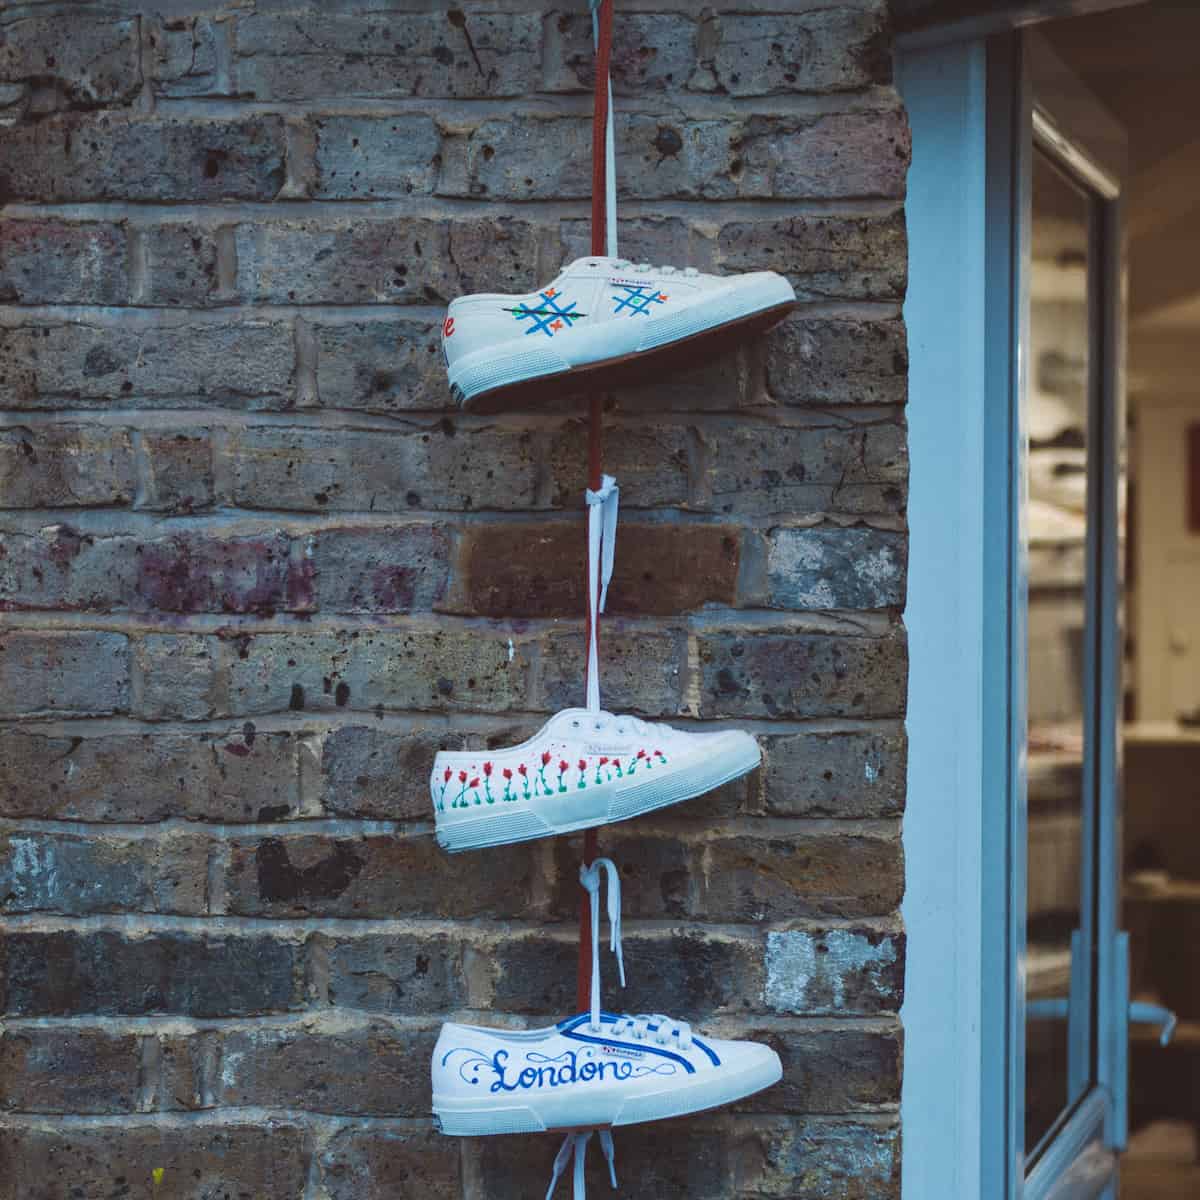 3 white sneakers hanging by shoestrings on a wall to represent HR on shoestring and free HR resources